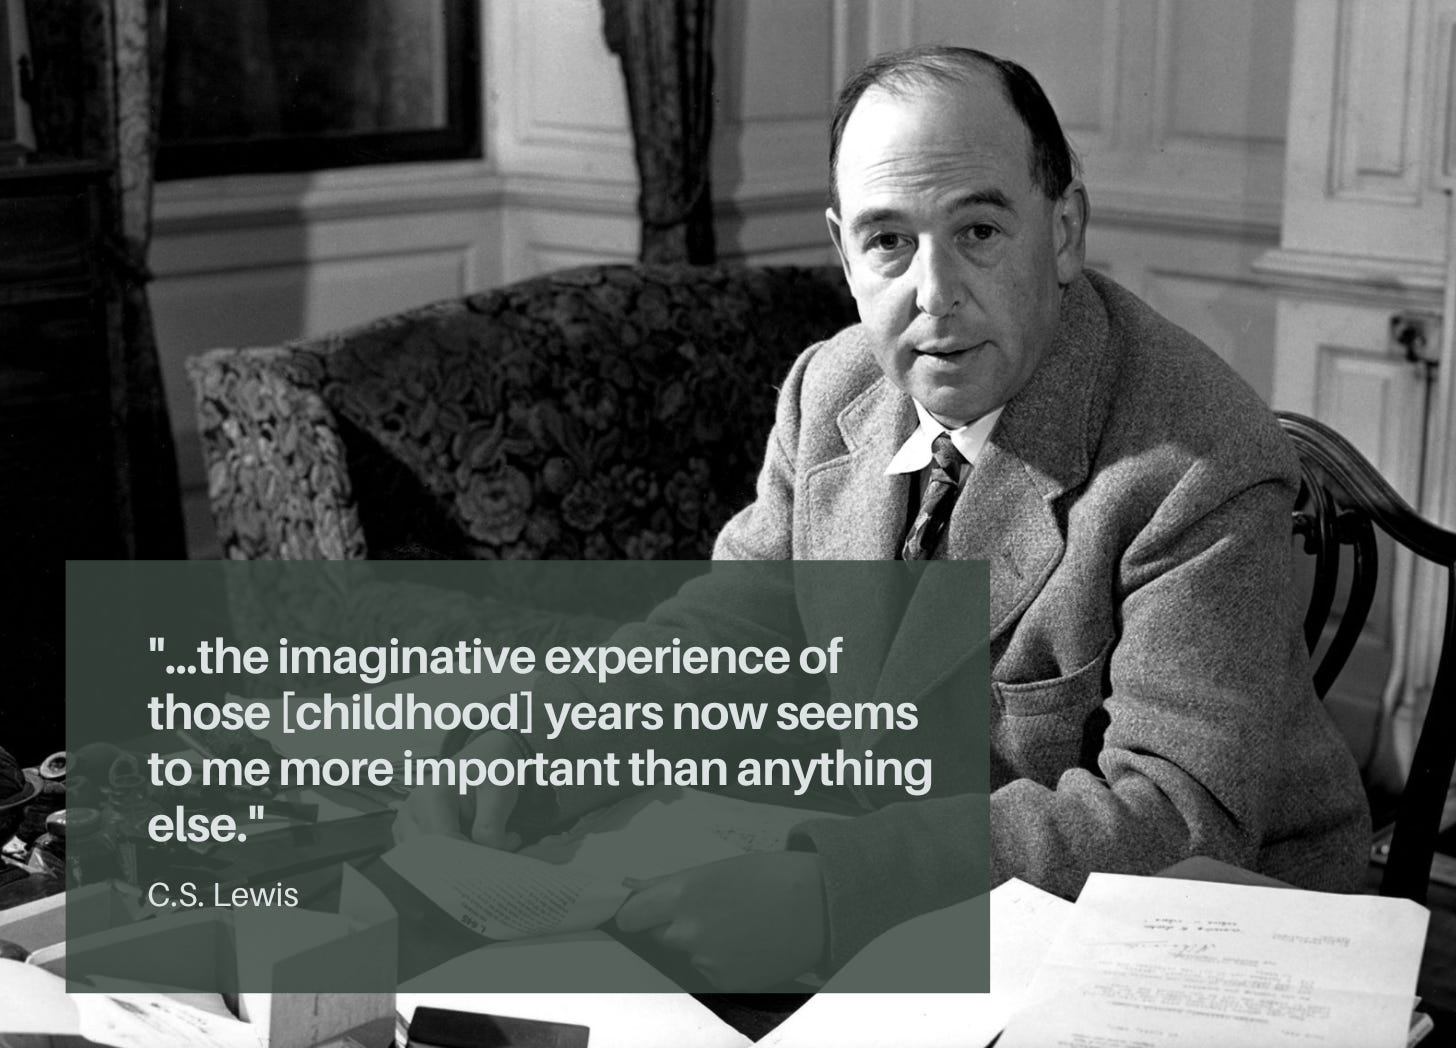 Black and white image of C.S. Lewis sitting at a desk looking at papers. Words superimposed say, "...the imaginative experience of those [childhood] years now seems to me more important than anything else."